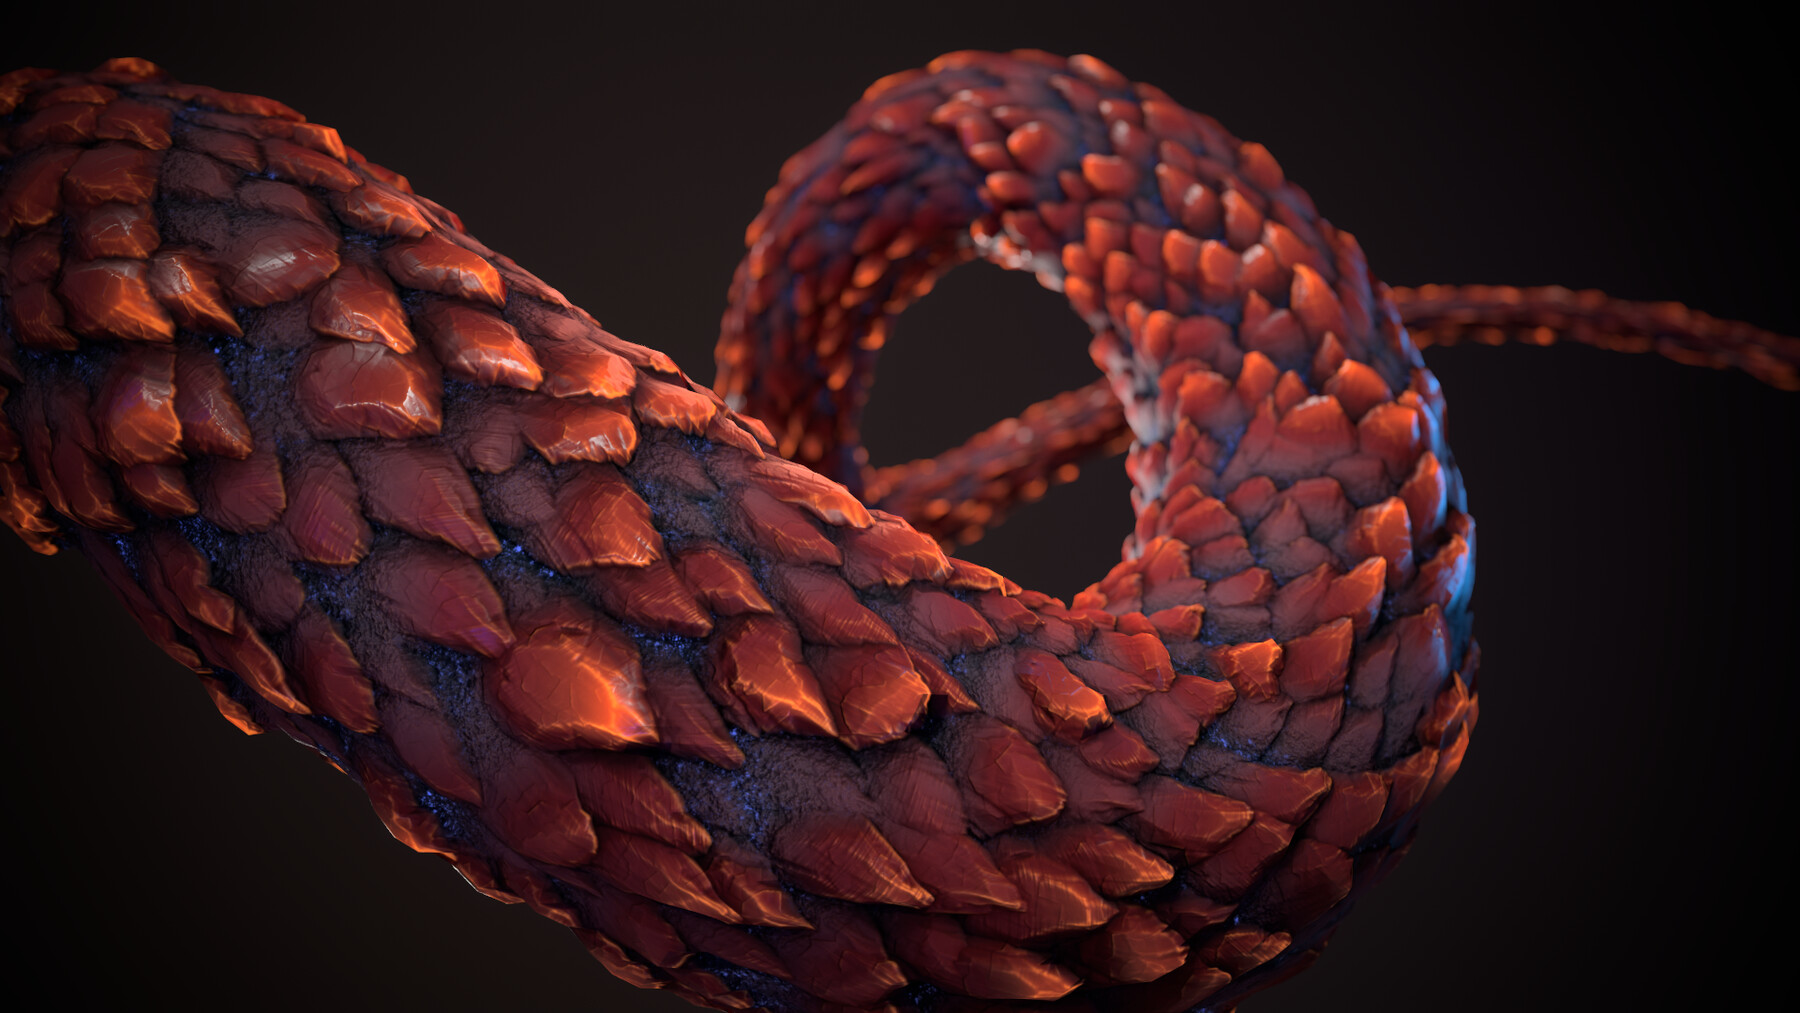 ArtStation - Reptile scales Substance Material